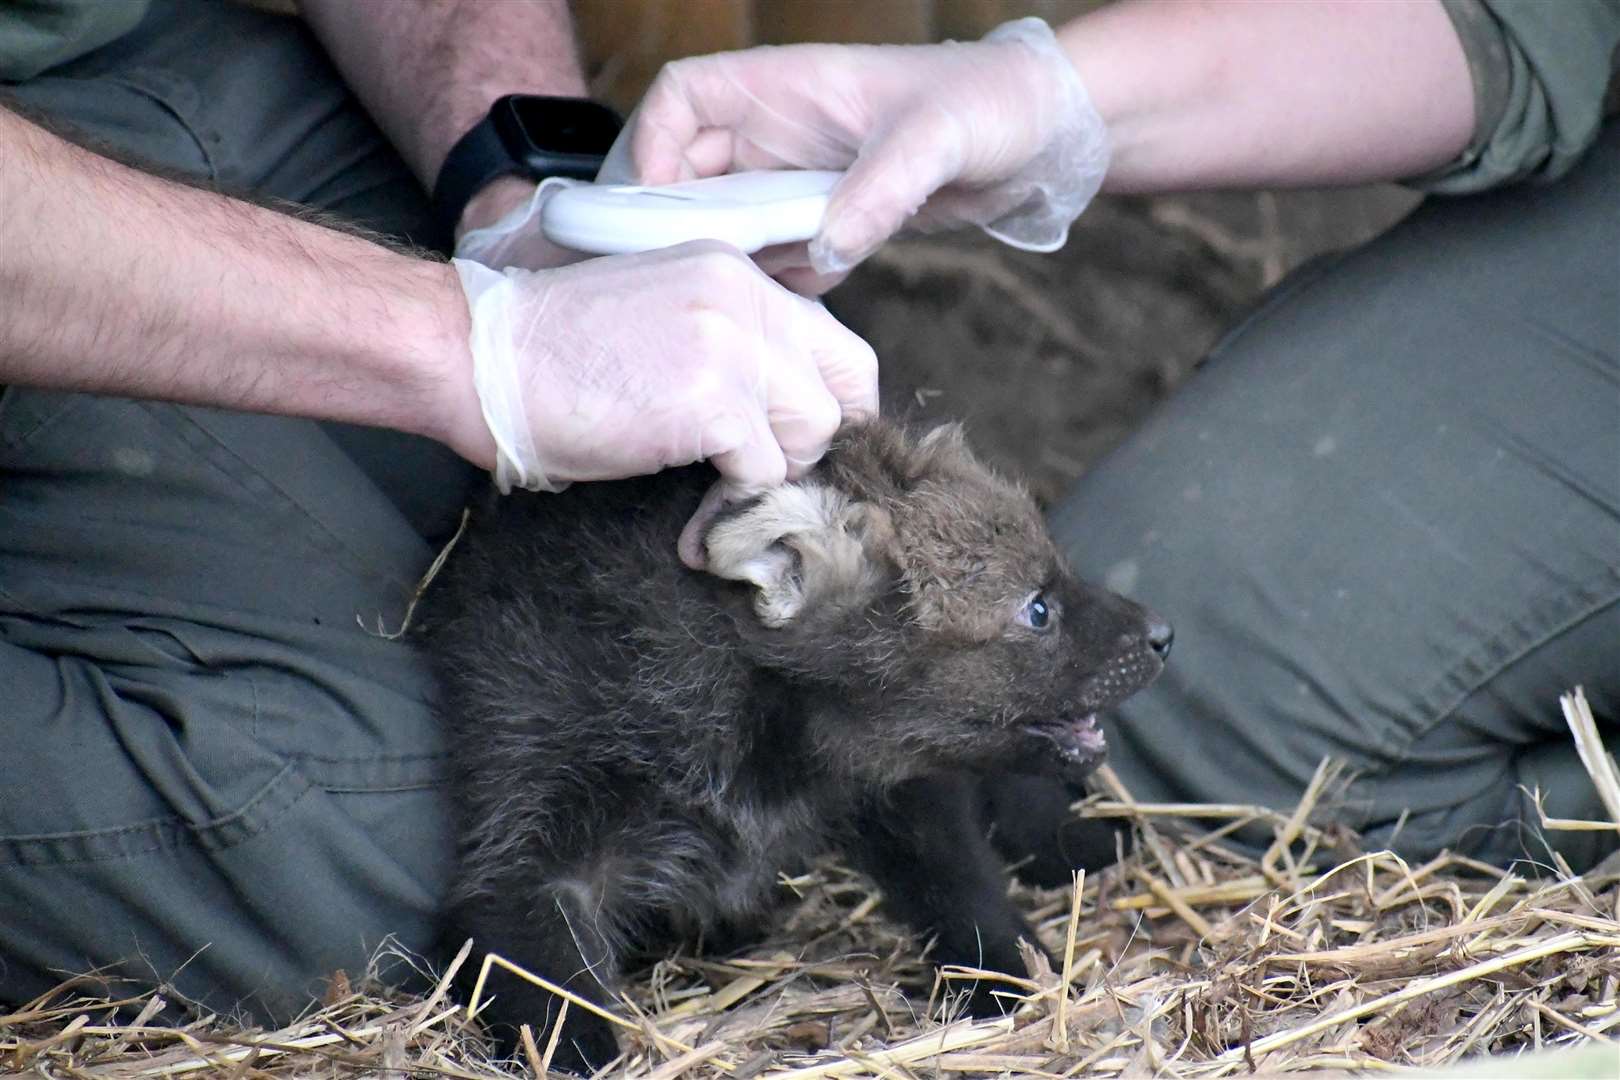 Maned Wolf cub being tended to by vet (Yorkshire Wildlife Park)